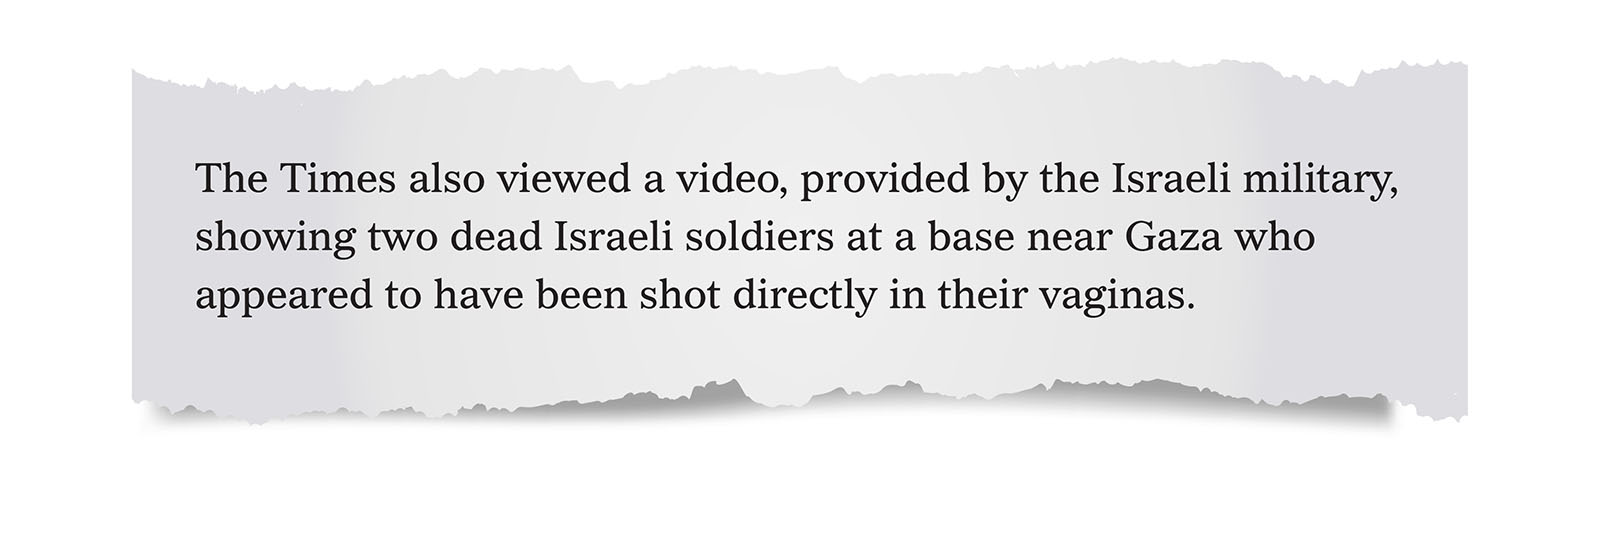 Pull quote:
The Times also viewed a video, provided by the Israeli military, showing two dead Israeli soldiers at a base near Gaza who appeared to have been shot directly in their vaginas.